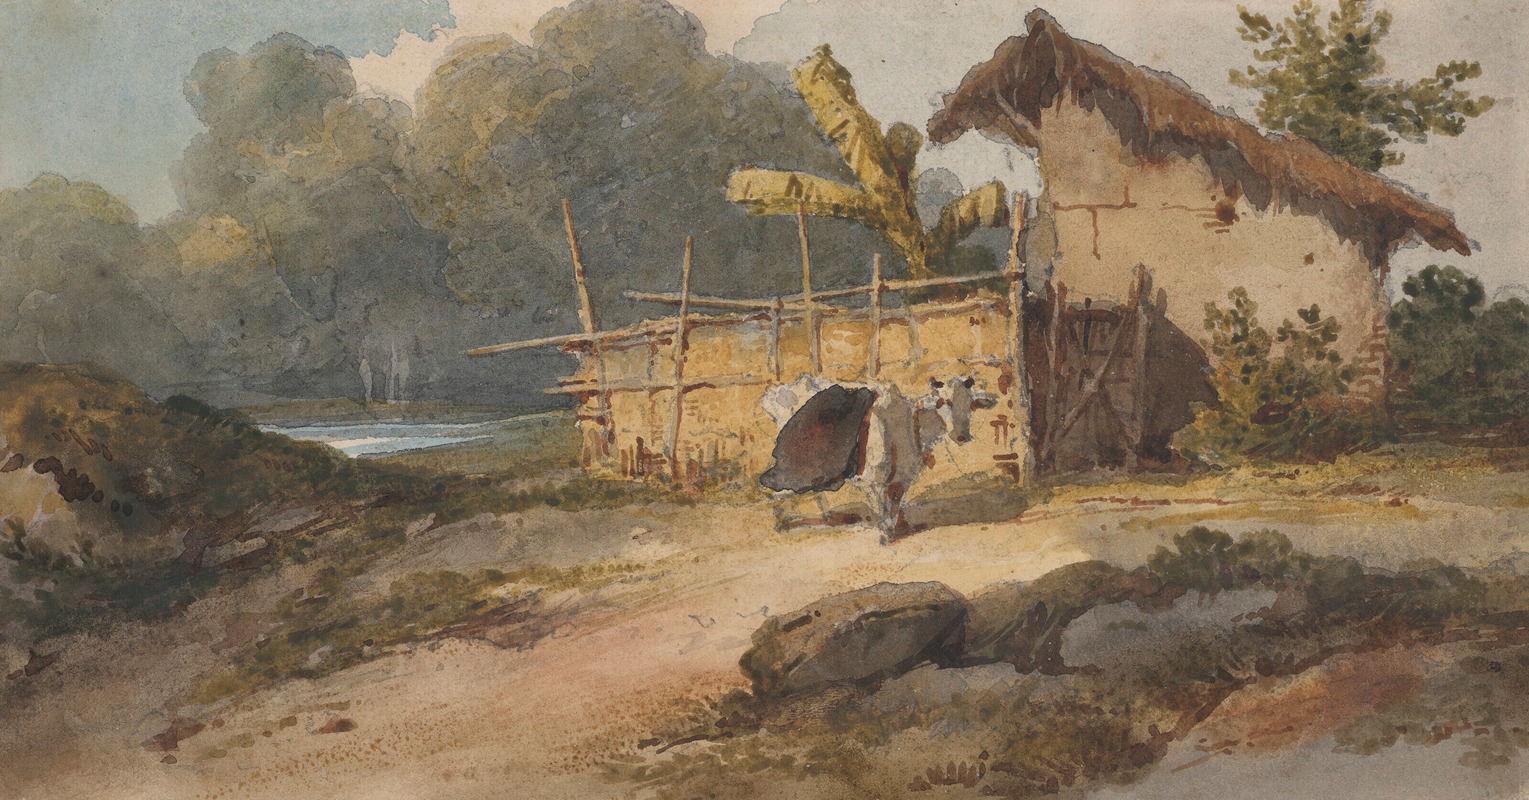 George Chinnery - A hut by a river with a cow, Bengal